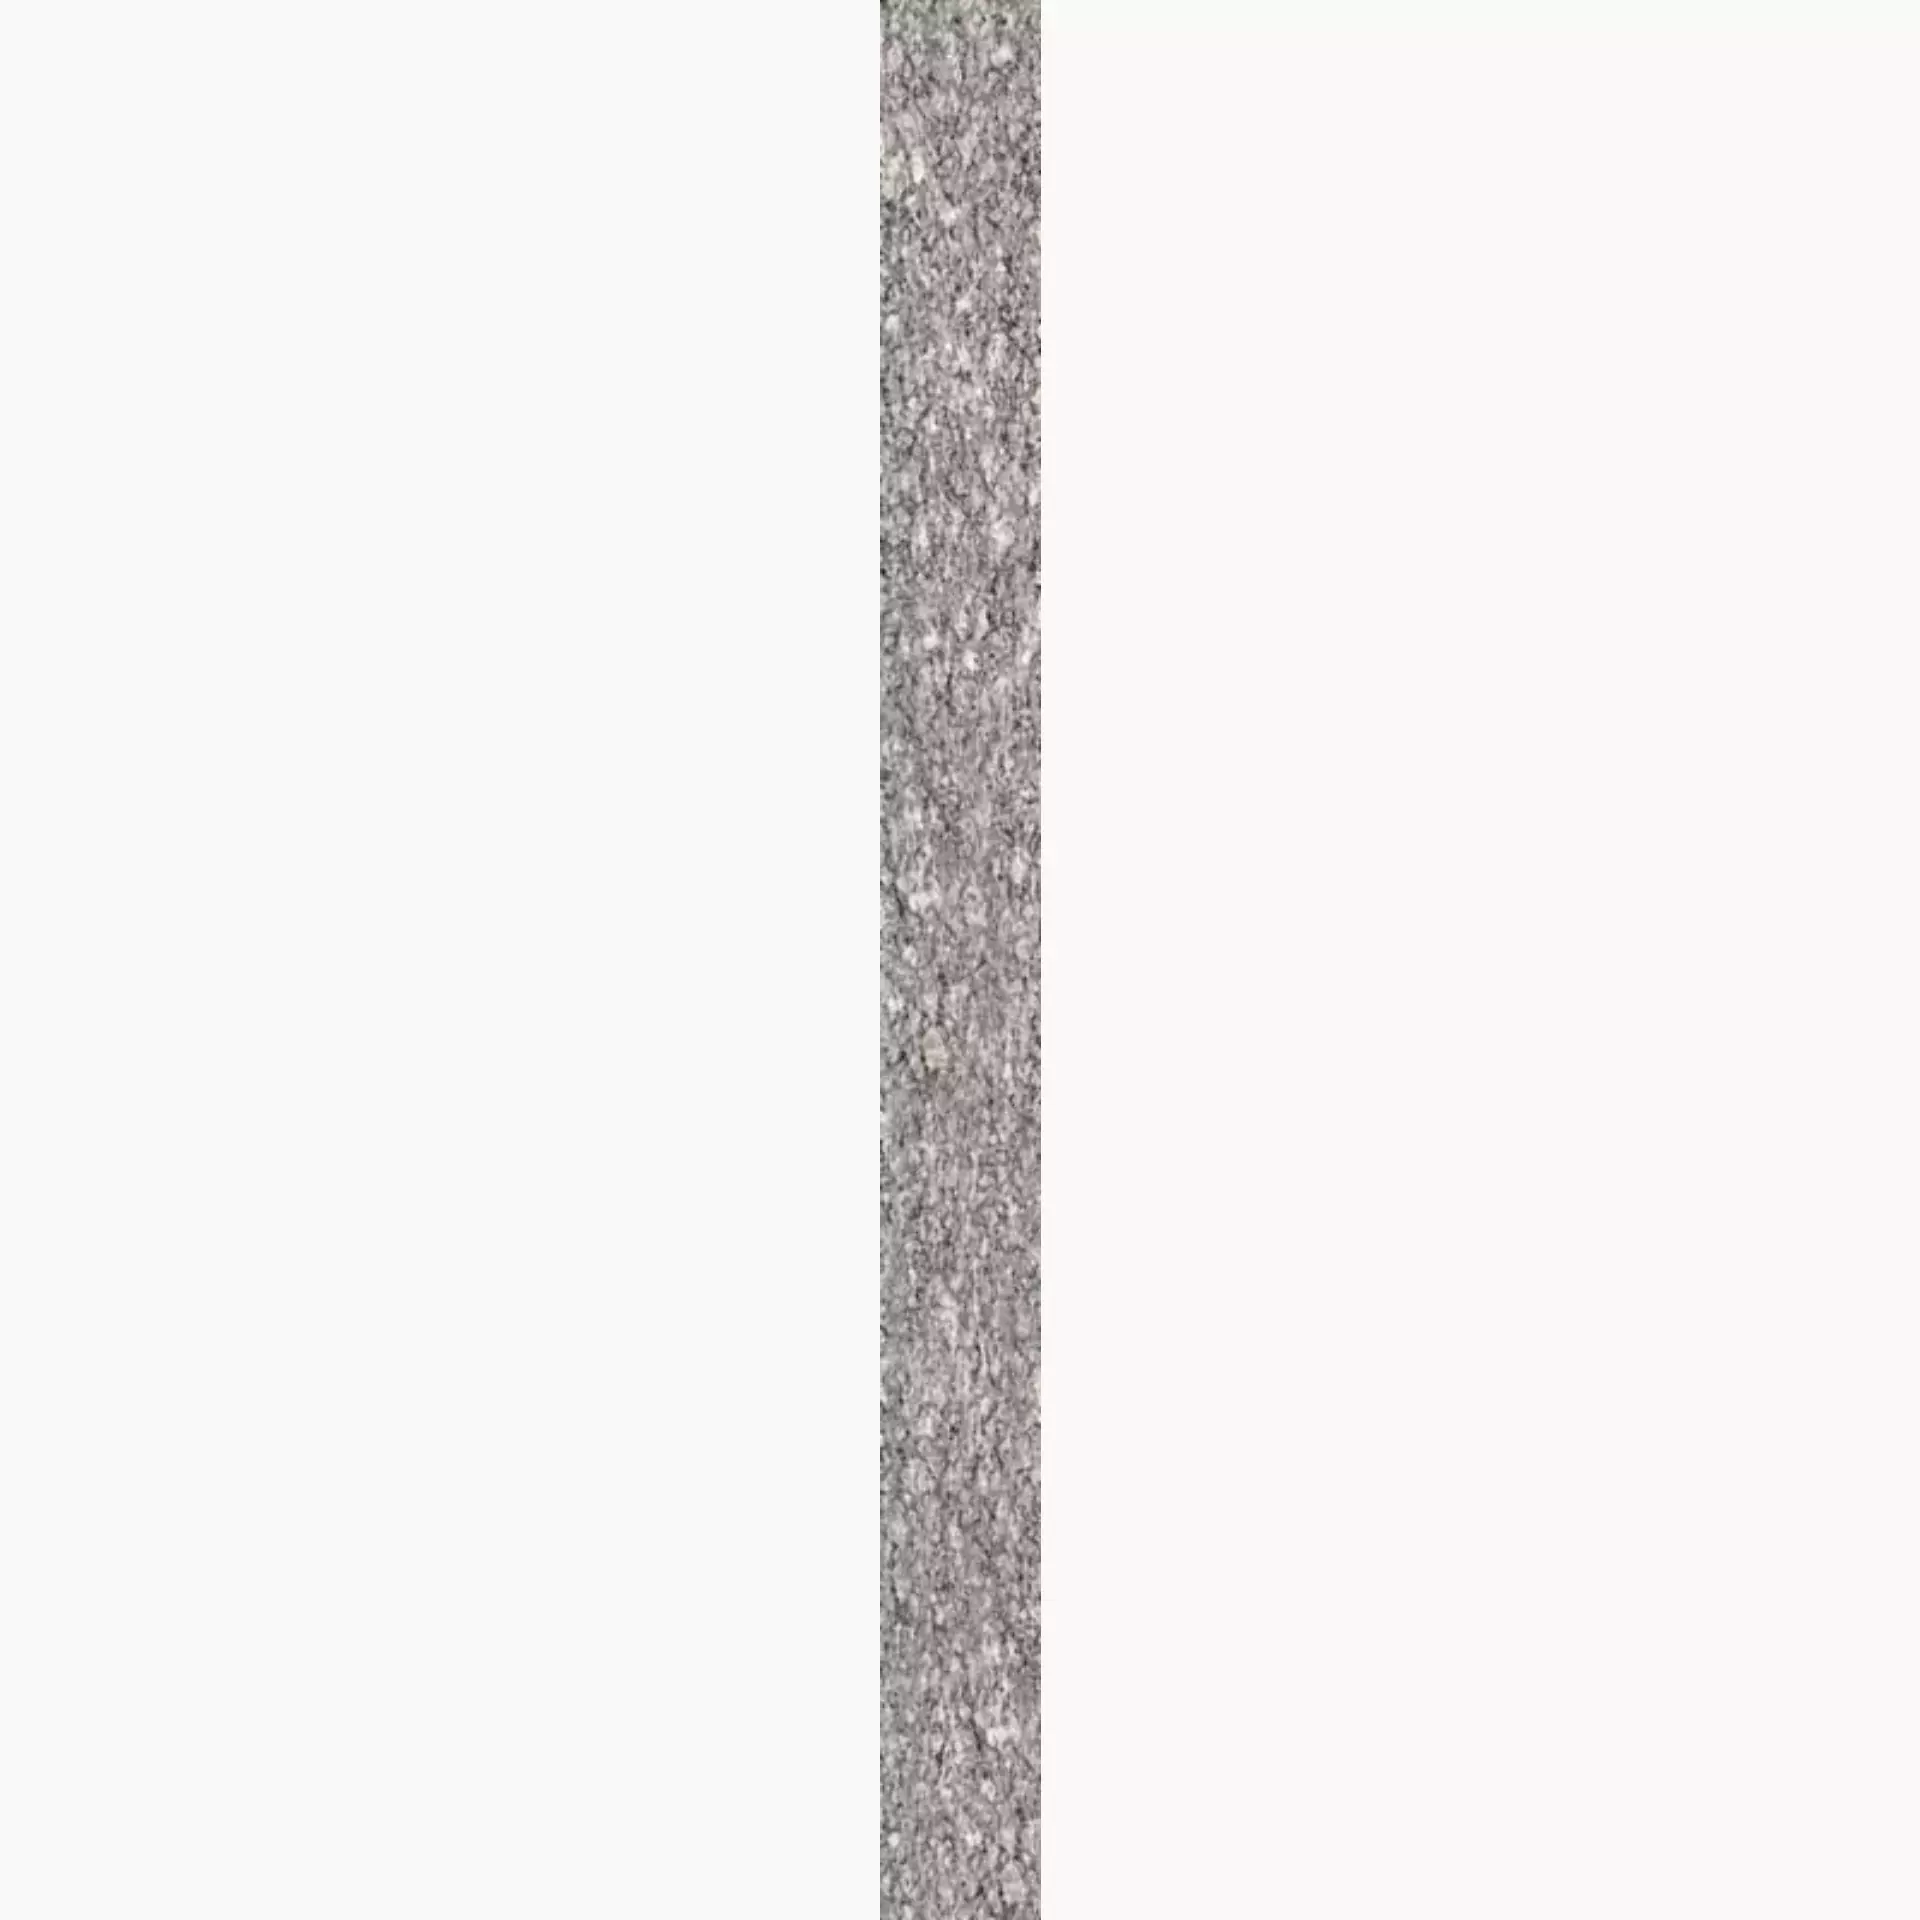 Sant Agostino Unionstone London Grey Natural CSALOGRY05 5x60cm rectified 10mm